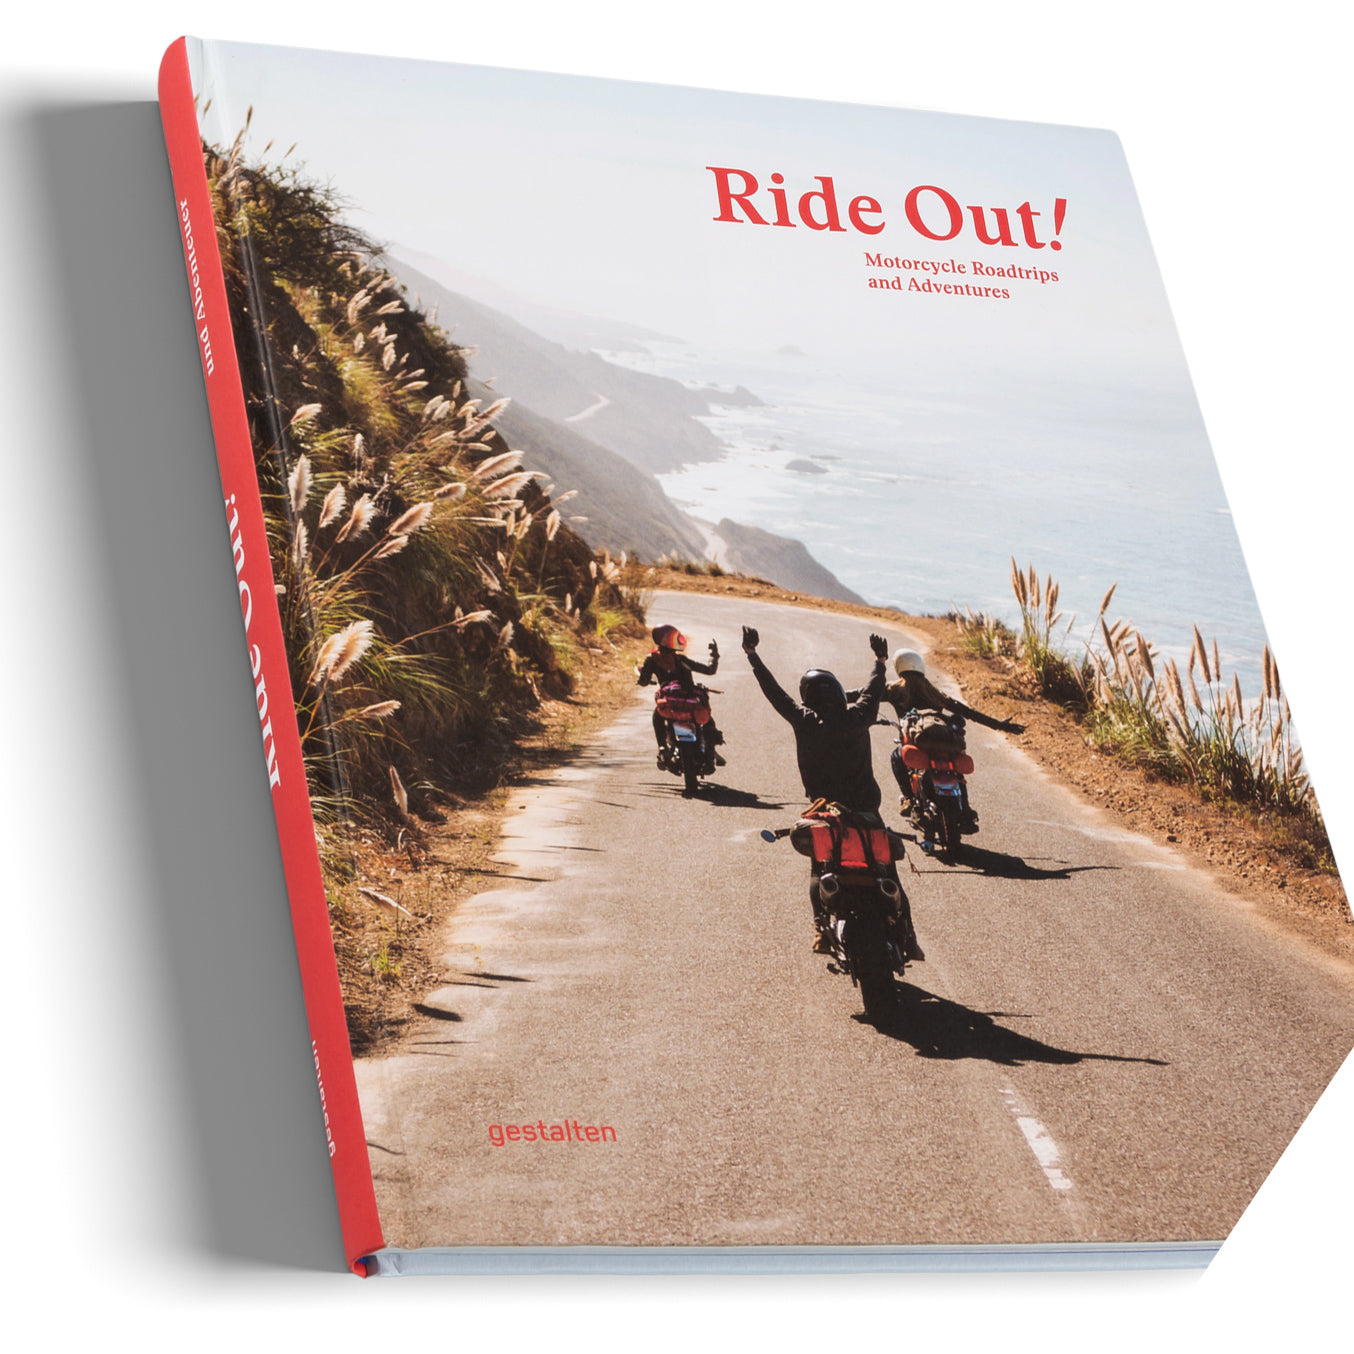 Ride Out - Motorcycle Roadtrips and Adventures